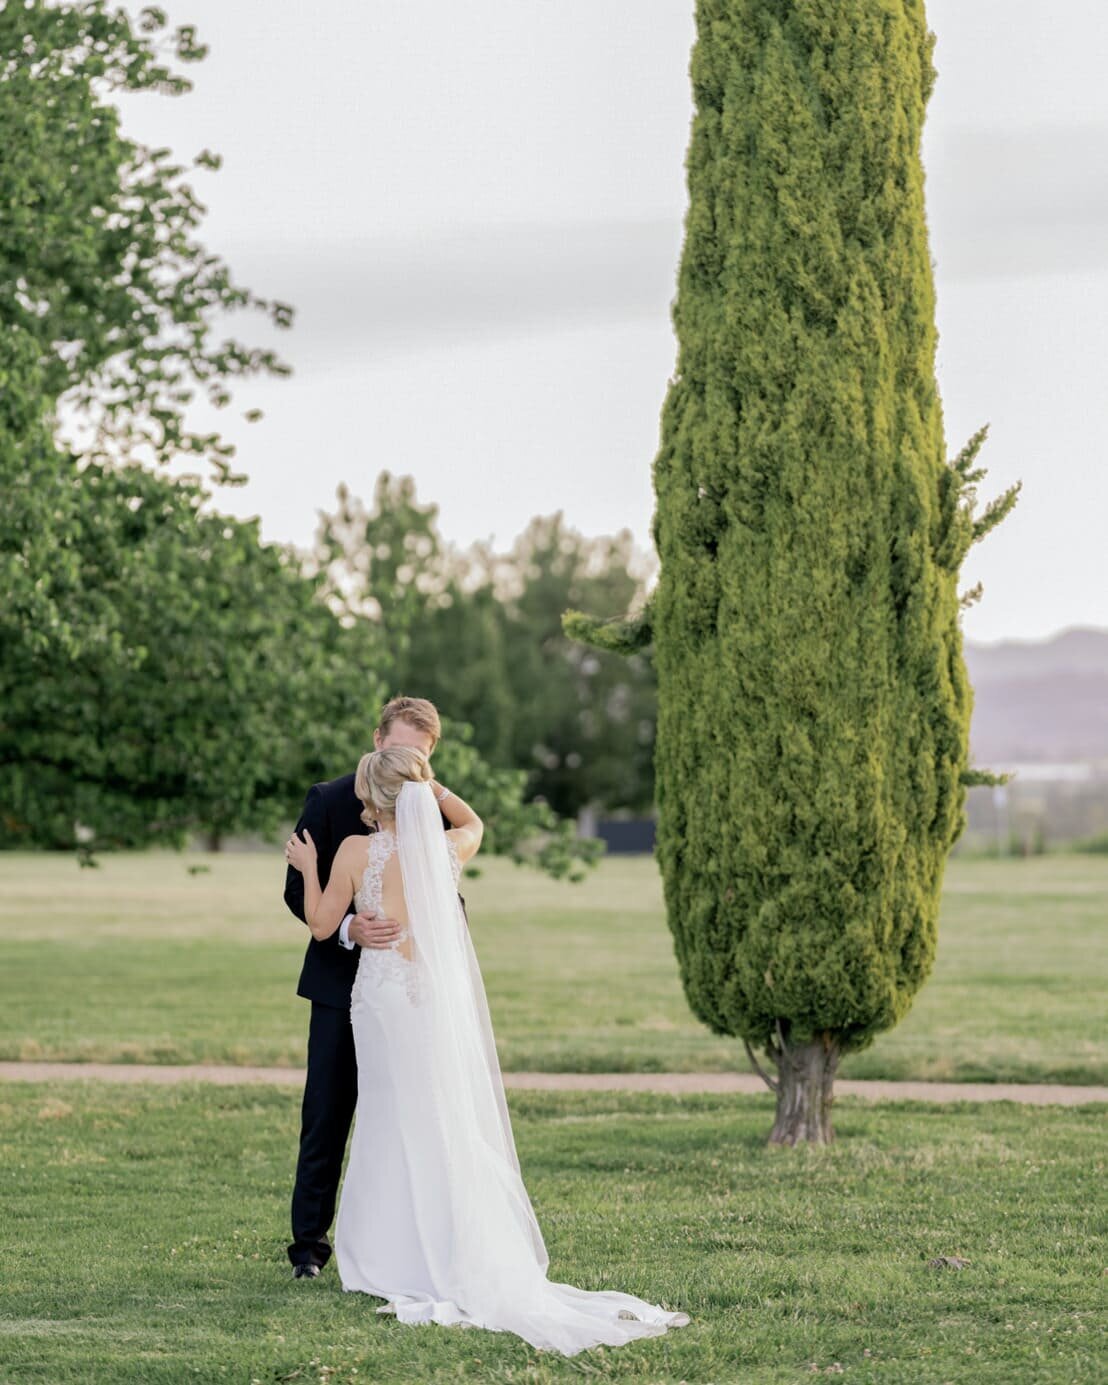 Stones of the Yarra Valley wedding - Serenity Photography 92